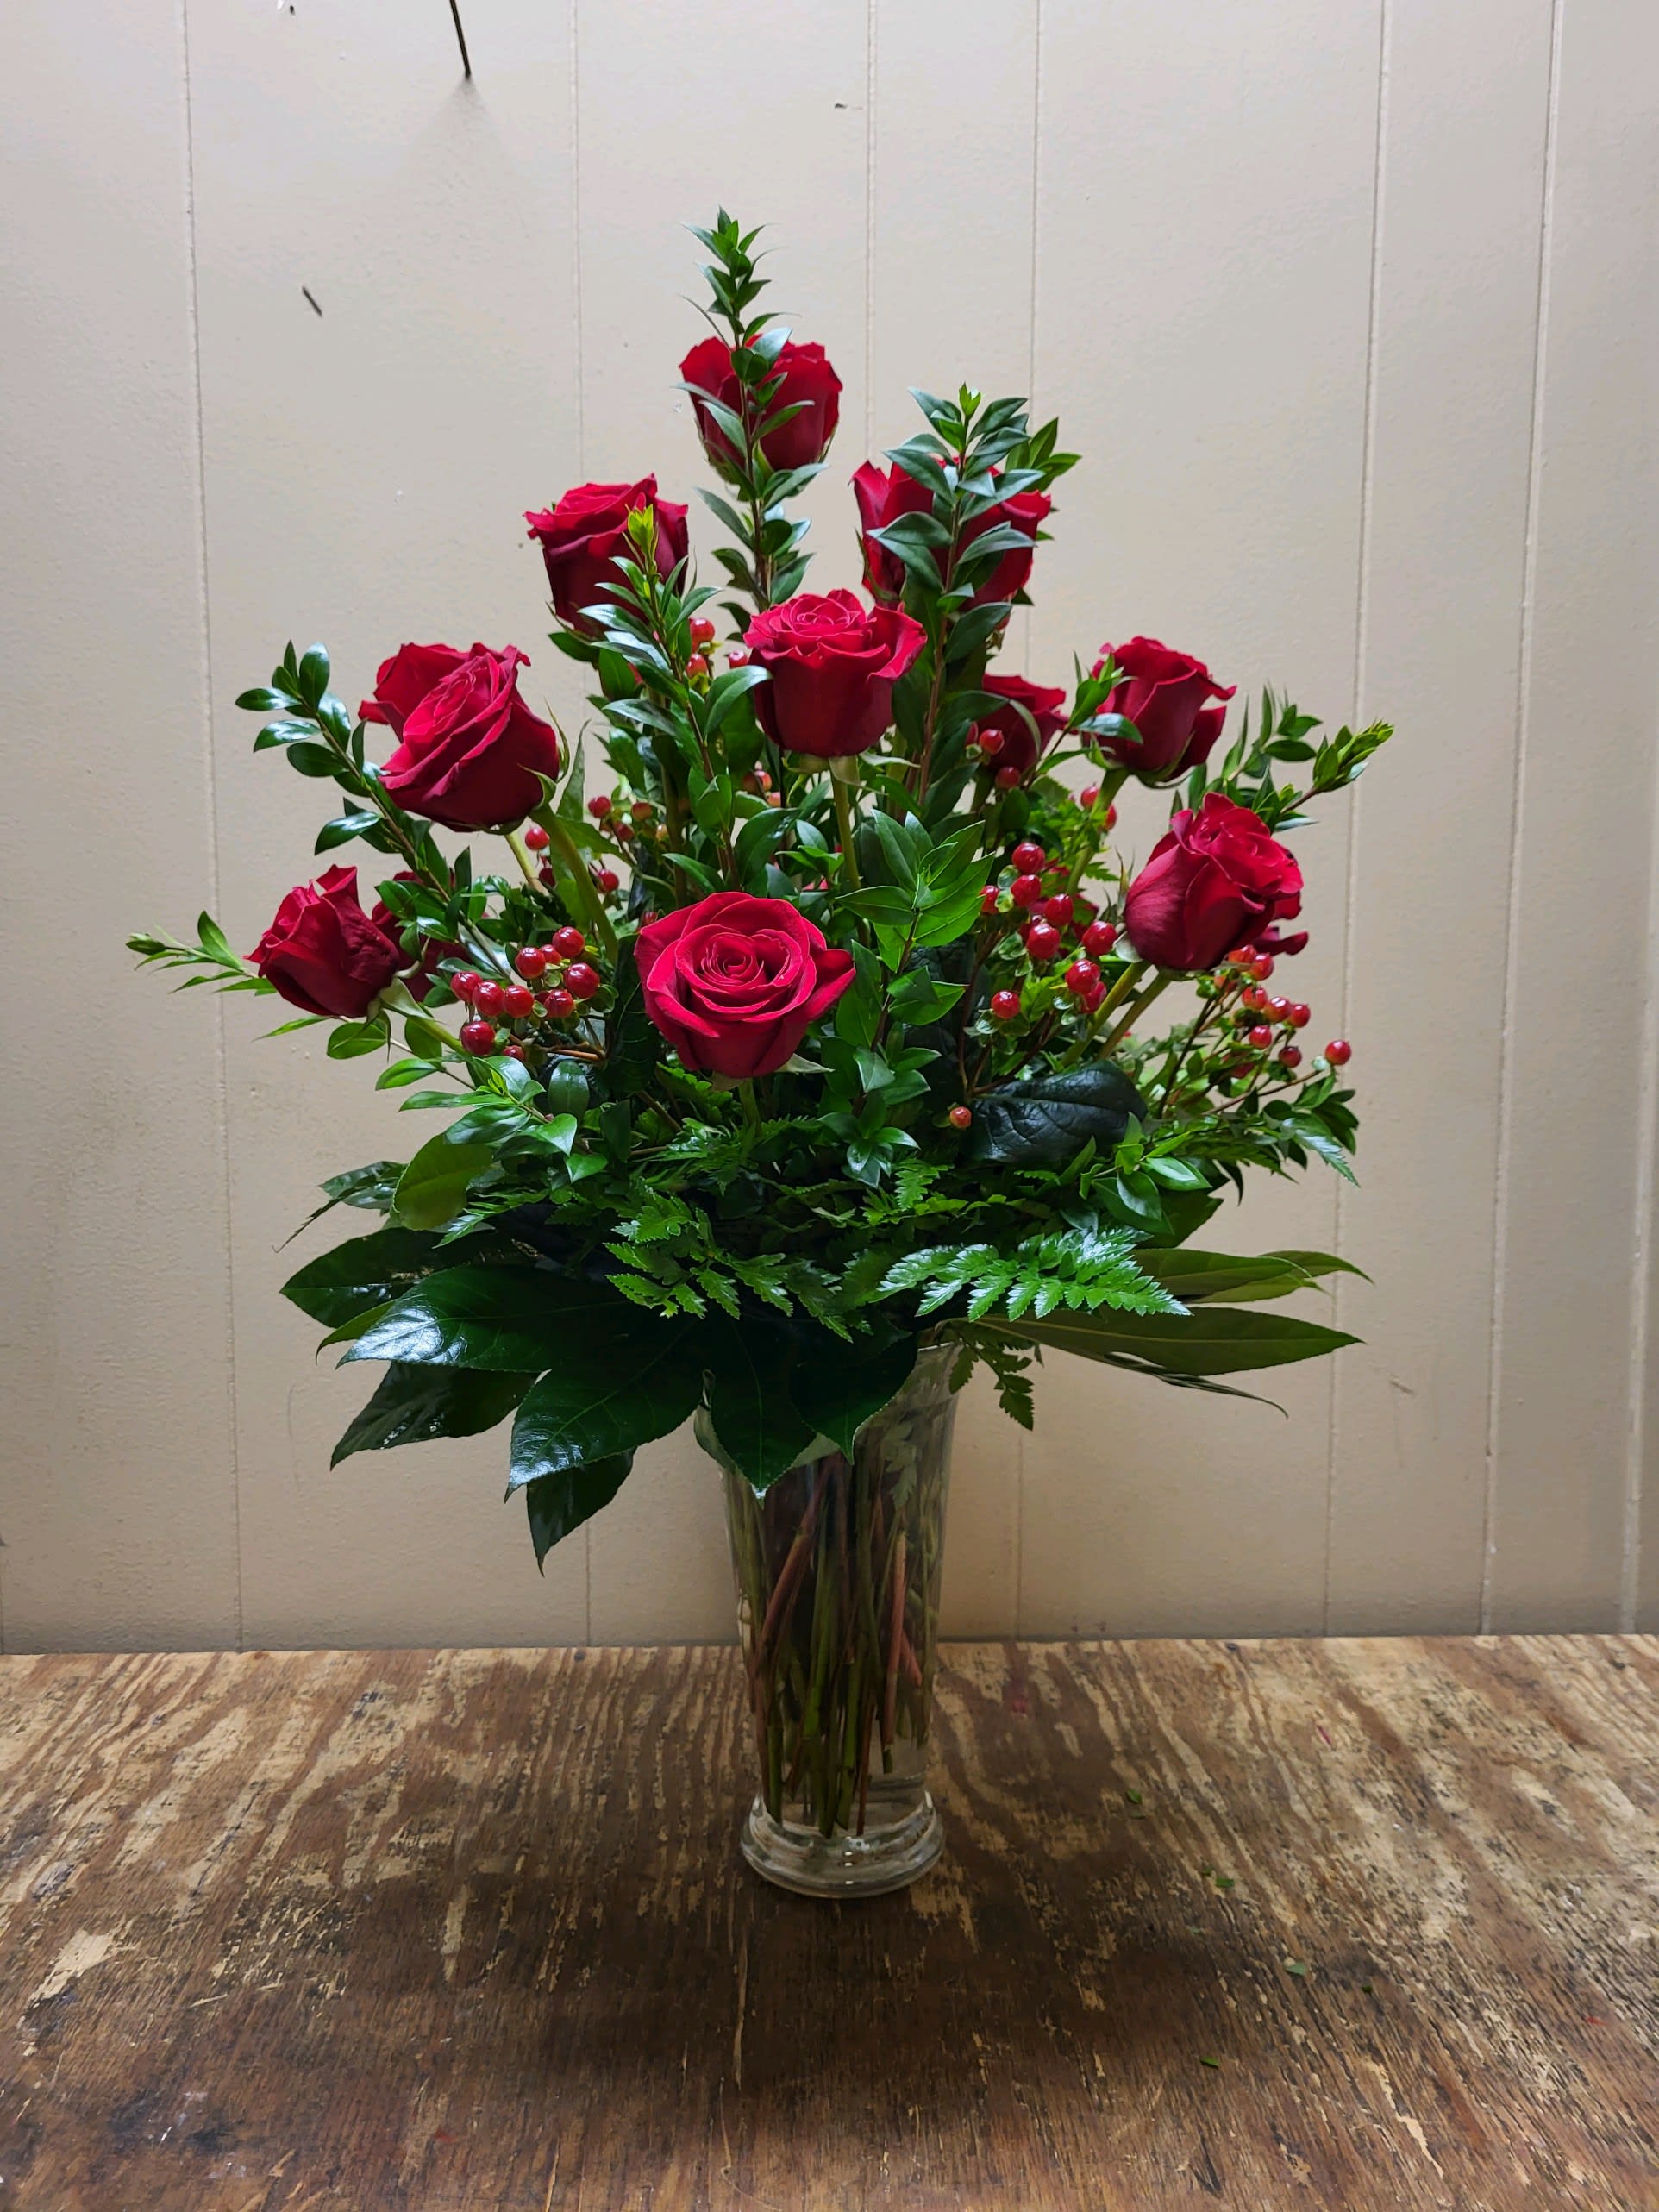 One Dozen Red Roses - Red roses have symbolized love and romance for centuries. One need only gaze at a classic red rose arrangement, like this one, to see why. Red roses are stunning, dramatic, and they say so much - without saying a word.  A dozen red roses with greens &amp; fillers are hand-delivered in a beautiful vase